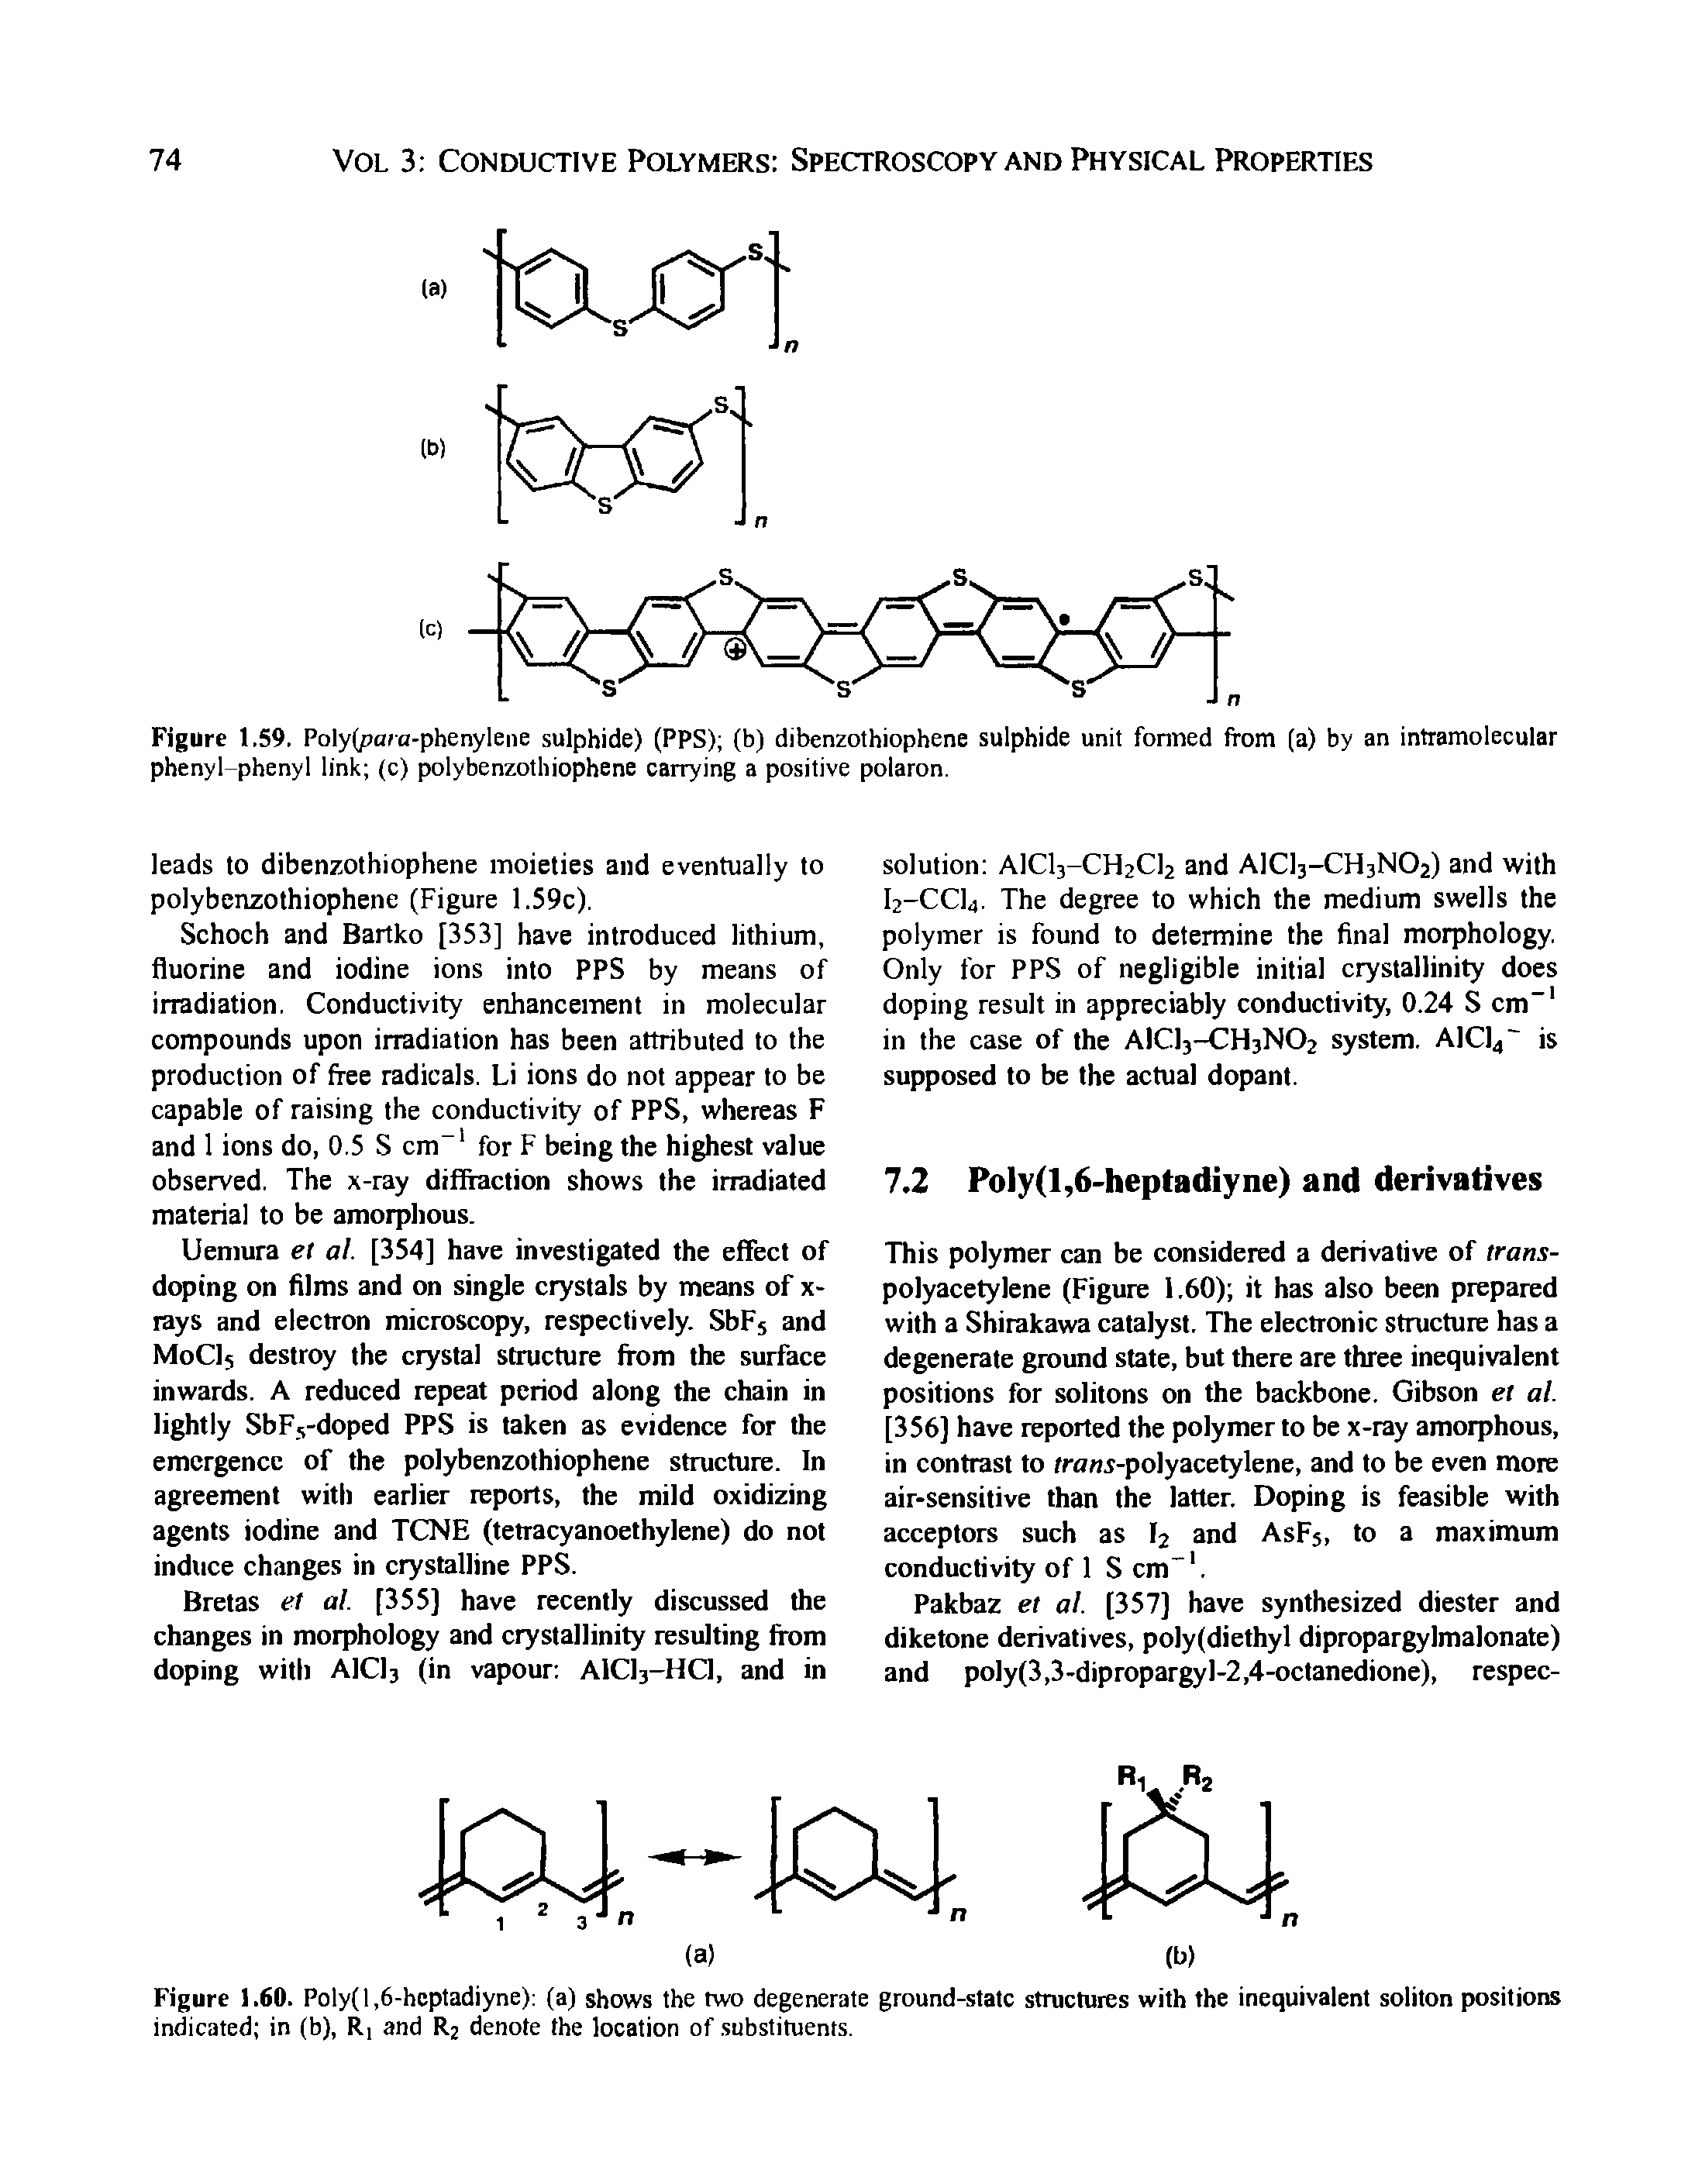 Figure 1,59, Poly(para-phenylene sulphide) (PPS) (b) dibenzothiophene sulphide unit formed from (a) by an intramolecular phenyl-phenyl link (c) polybenzothiophene carrying a positive polaron.